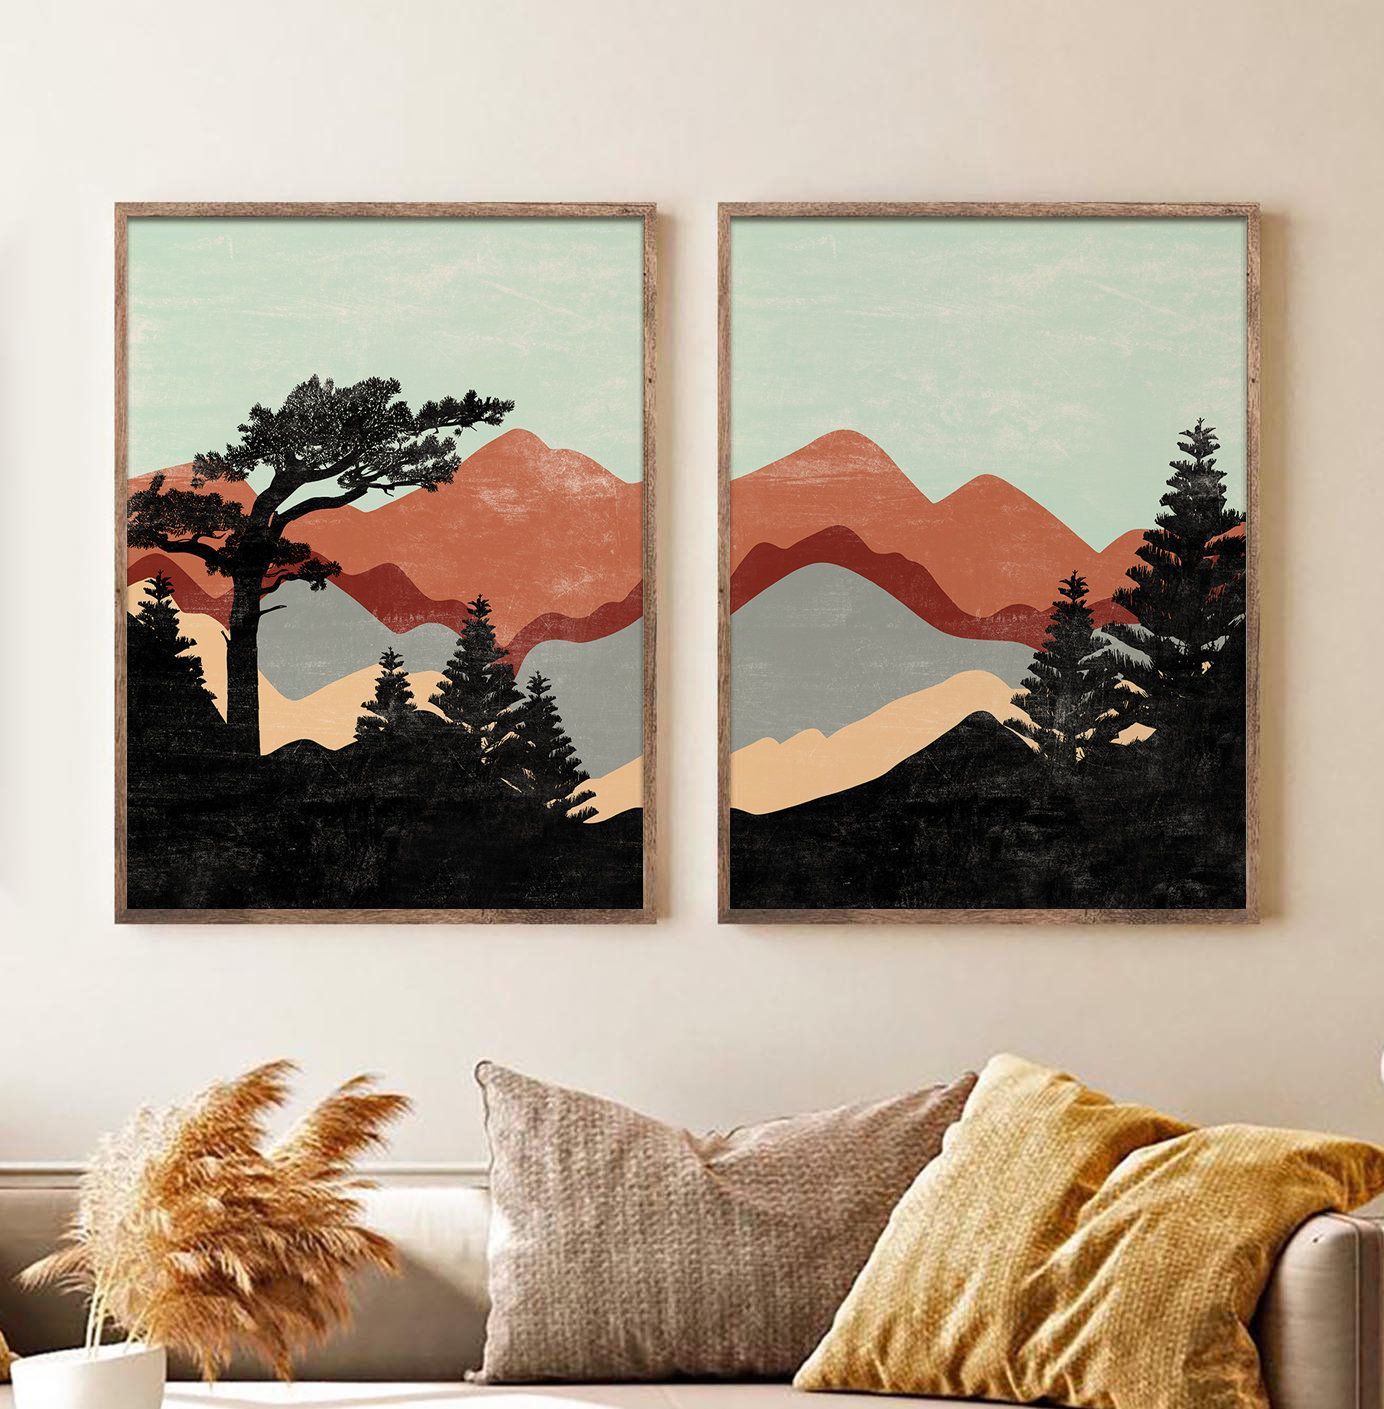 Pin On Art Digital Prints With Regard To Abstract Terracotta Landscape Wall Art (View 6 of 15)